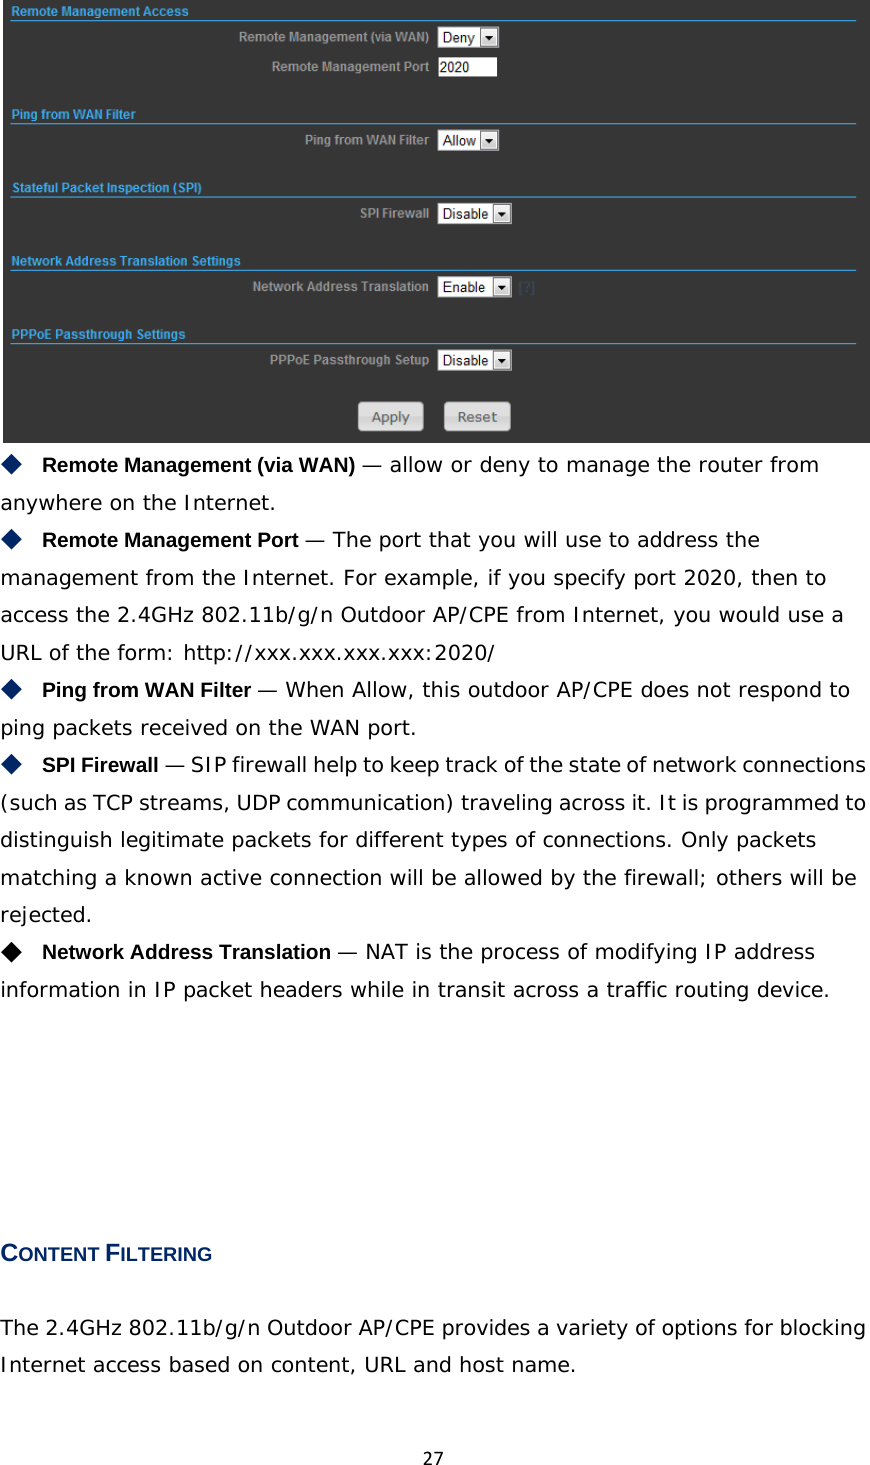 27 ◆　Remote Management (via WAN) — allow or deny to manage the router from anywhere on the Internet. ◆　Remote Management Port — The port that you will use to address the management from the Internet. For example, if you specify port 2020, then to access the 2.4GHz 802.11b/g/n Outdoor AP/CPE from Internet, you would use a URL of the form: http://xxx.xxx.xxx.xxx:2020/ ◆　Ping from WAN Filter — When Allow, this outdoor AP/CPE does not respond to ping packets received on the WAN port. ◆　SPI Firewall — SIP firewall help to keep track of the state of network connections (such as TCP streams, UDP communication) traveling across it. It is programmed to distinguish legitimate packets for different types of connections. Only packets matching a known active connection will be allowed by the firewall; others will be rejected. ◆　Network Address Translation — NAT is the process of modifying IP address information in IP packet headers while in transit across a traffic routing device.      CONTENT FILTERING The 2.4GHz 802.11b/g/n Outdoor AP/CPE provides a variety of options for blocking Internet access based on content, URL and host name. 